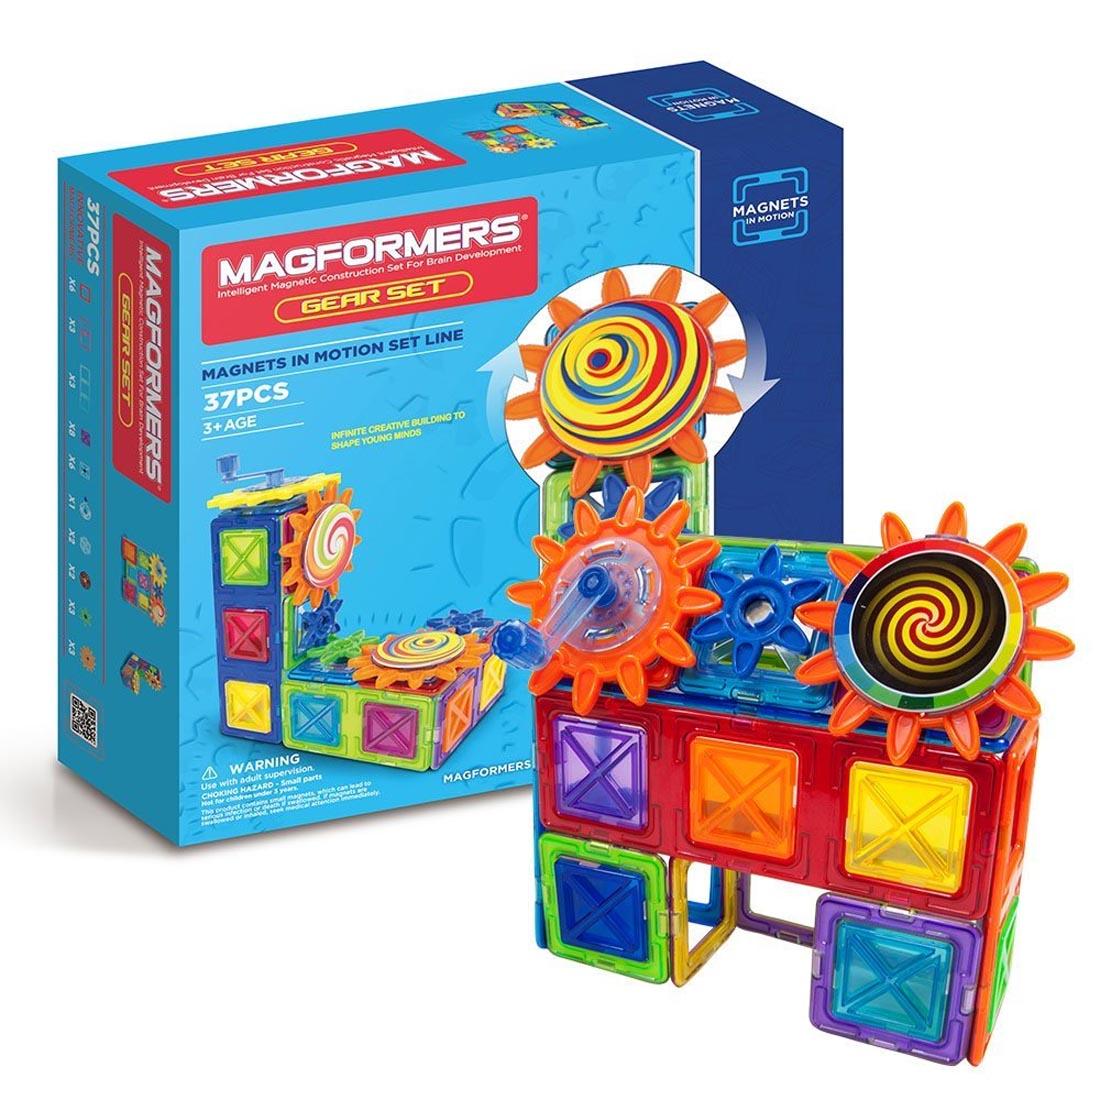 Package of Magformers Magnets in Motion 37-Piece Gear Set with an example construction in front